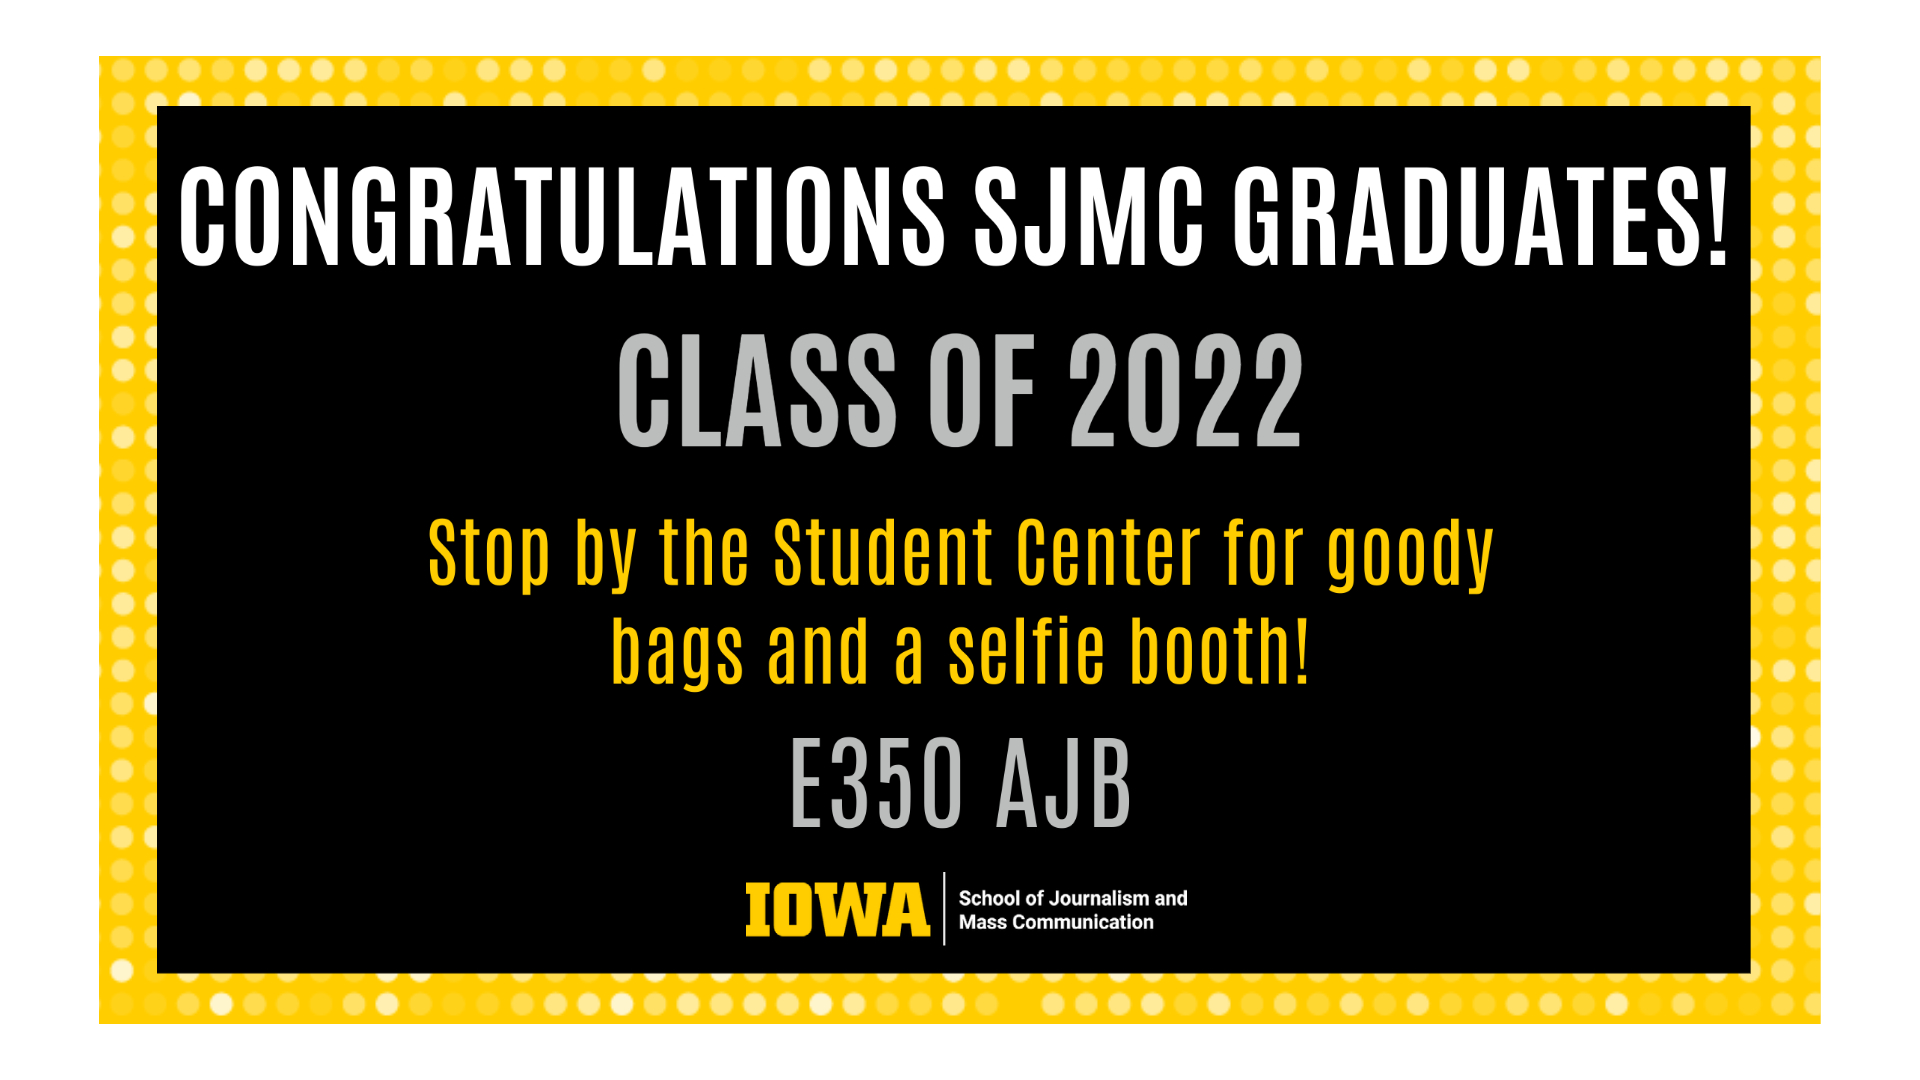 Congratulations graduates! come to the student center for a goody bag and a selfie